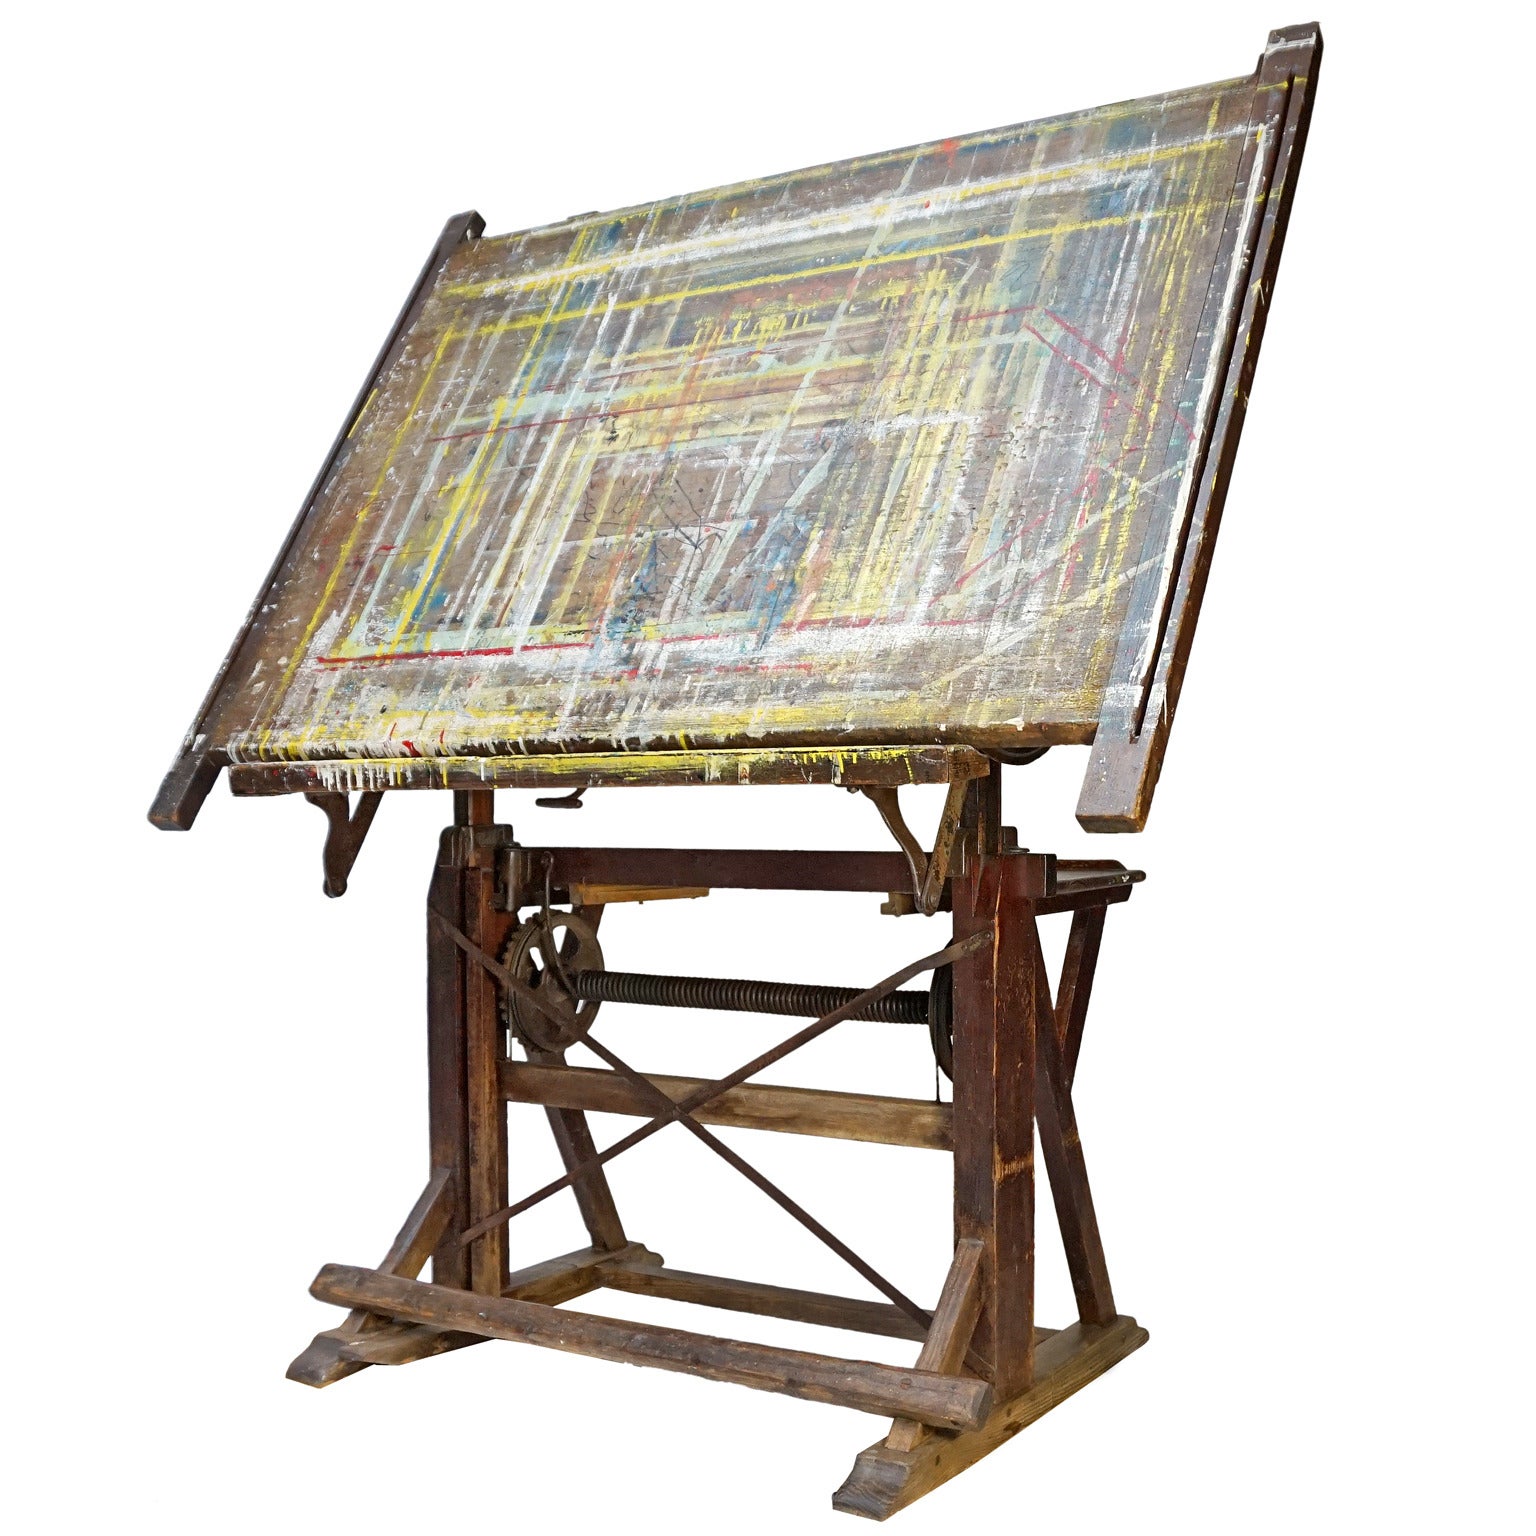 20th c. Jacques Nassheuer Drafting or Drawing Table from France